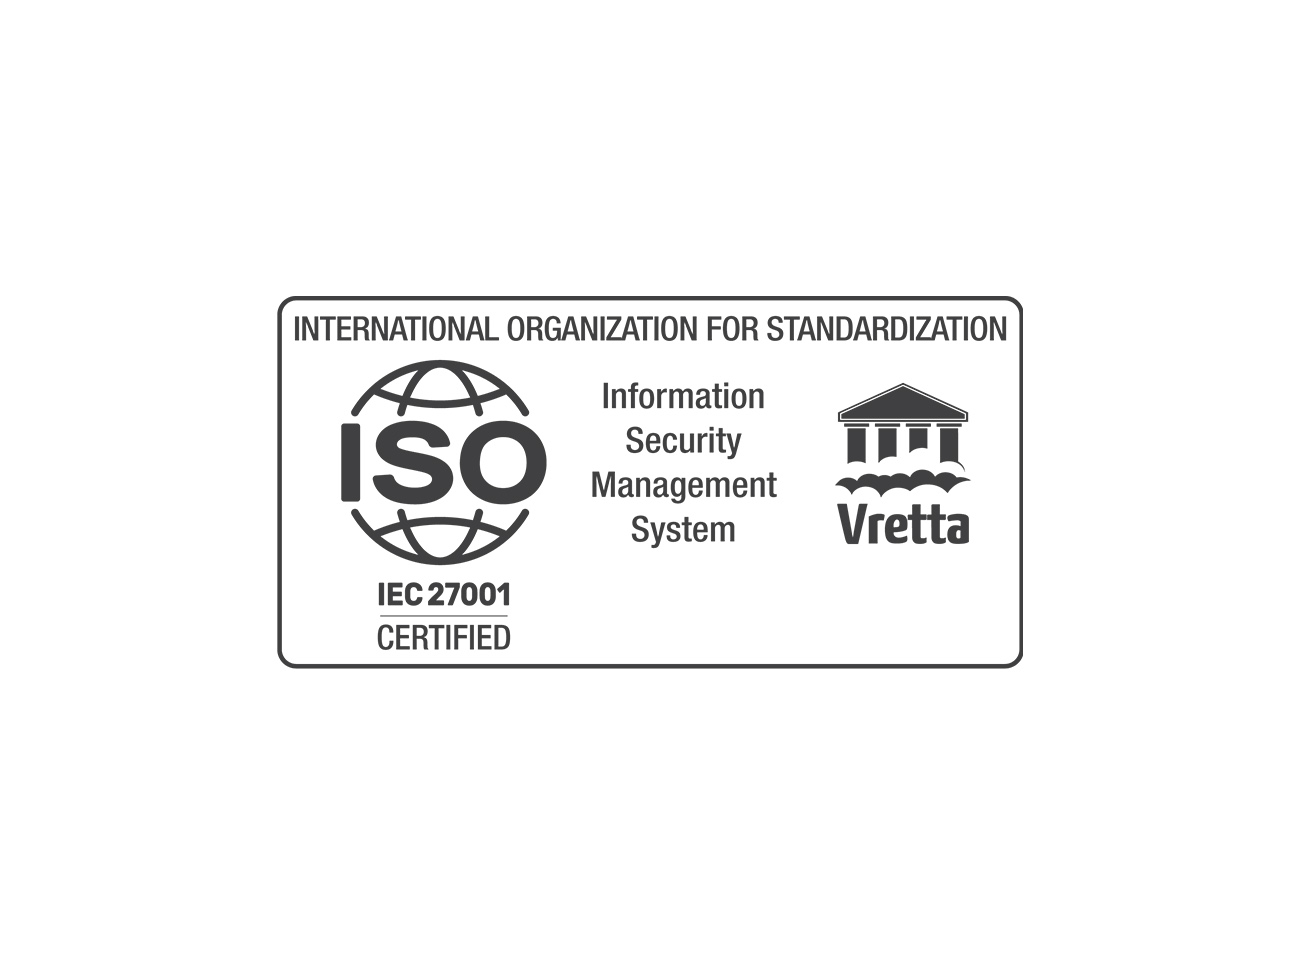 Vretta Achieves ISO/IEC 27001 Certification for their Information Security Management System